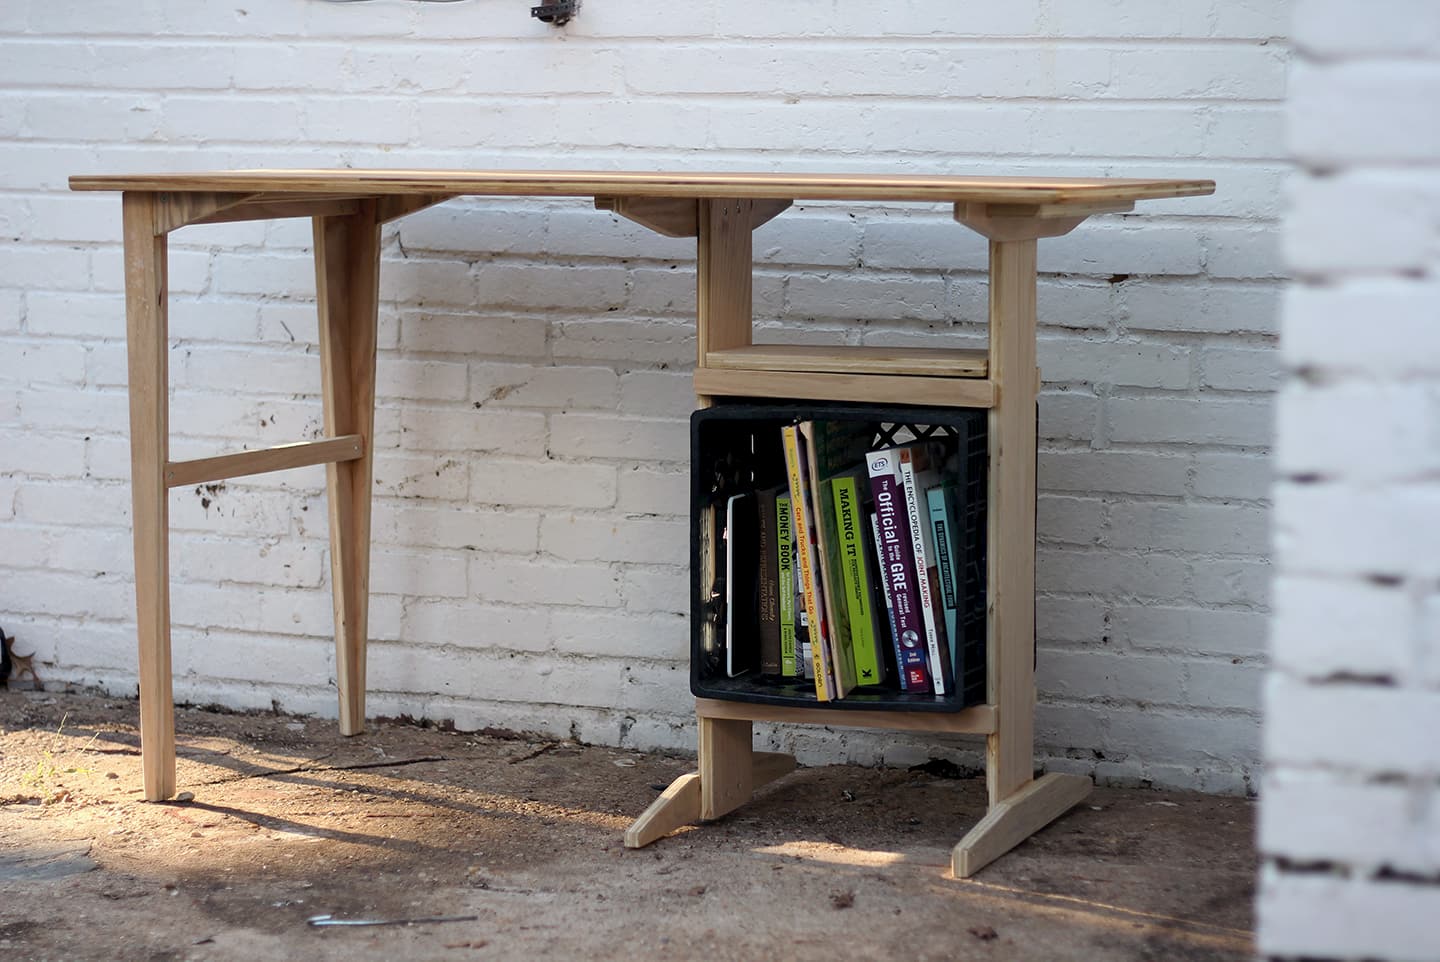 Plywood desk with a milk crate built into it as a shelf.